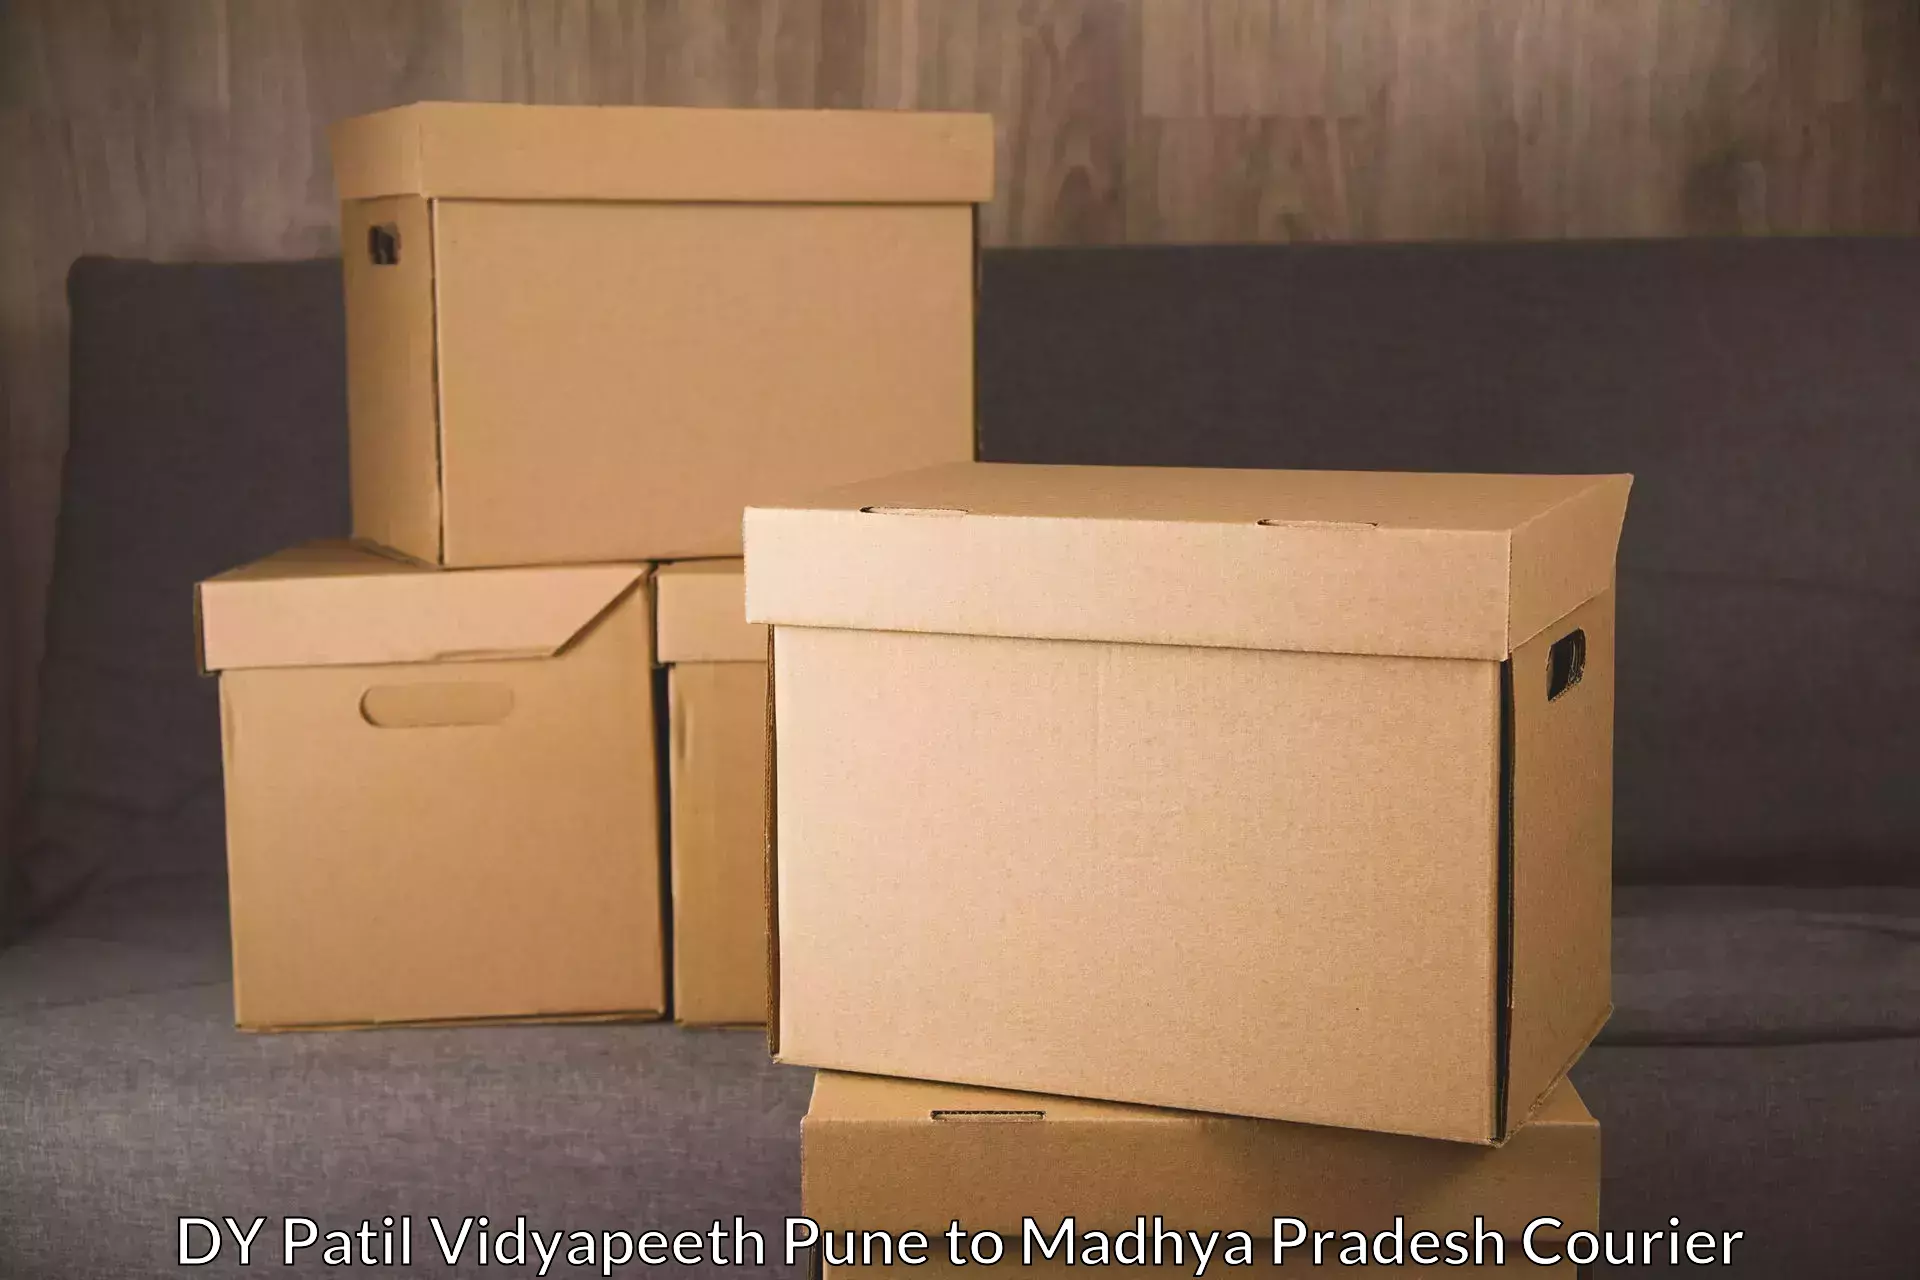 Quick courier services DY Patil Vidyapeeth Pune to Badnagar